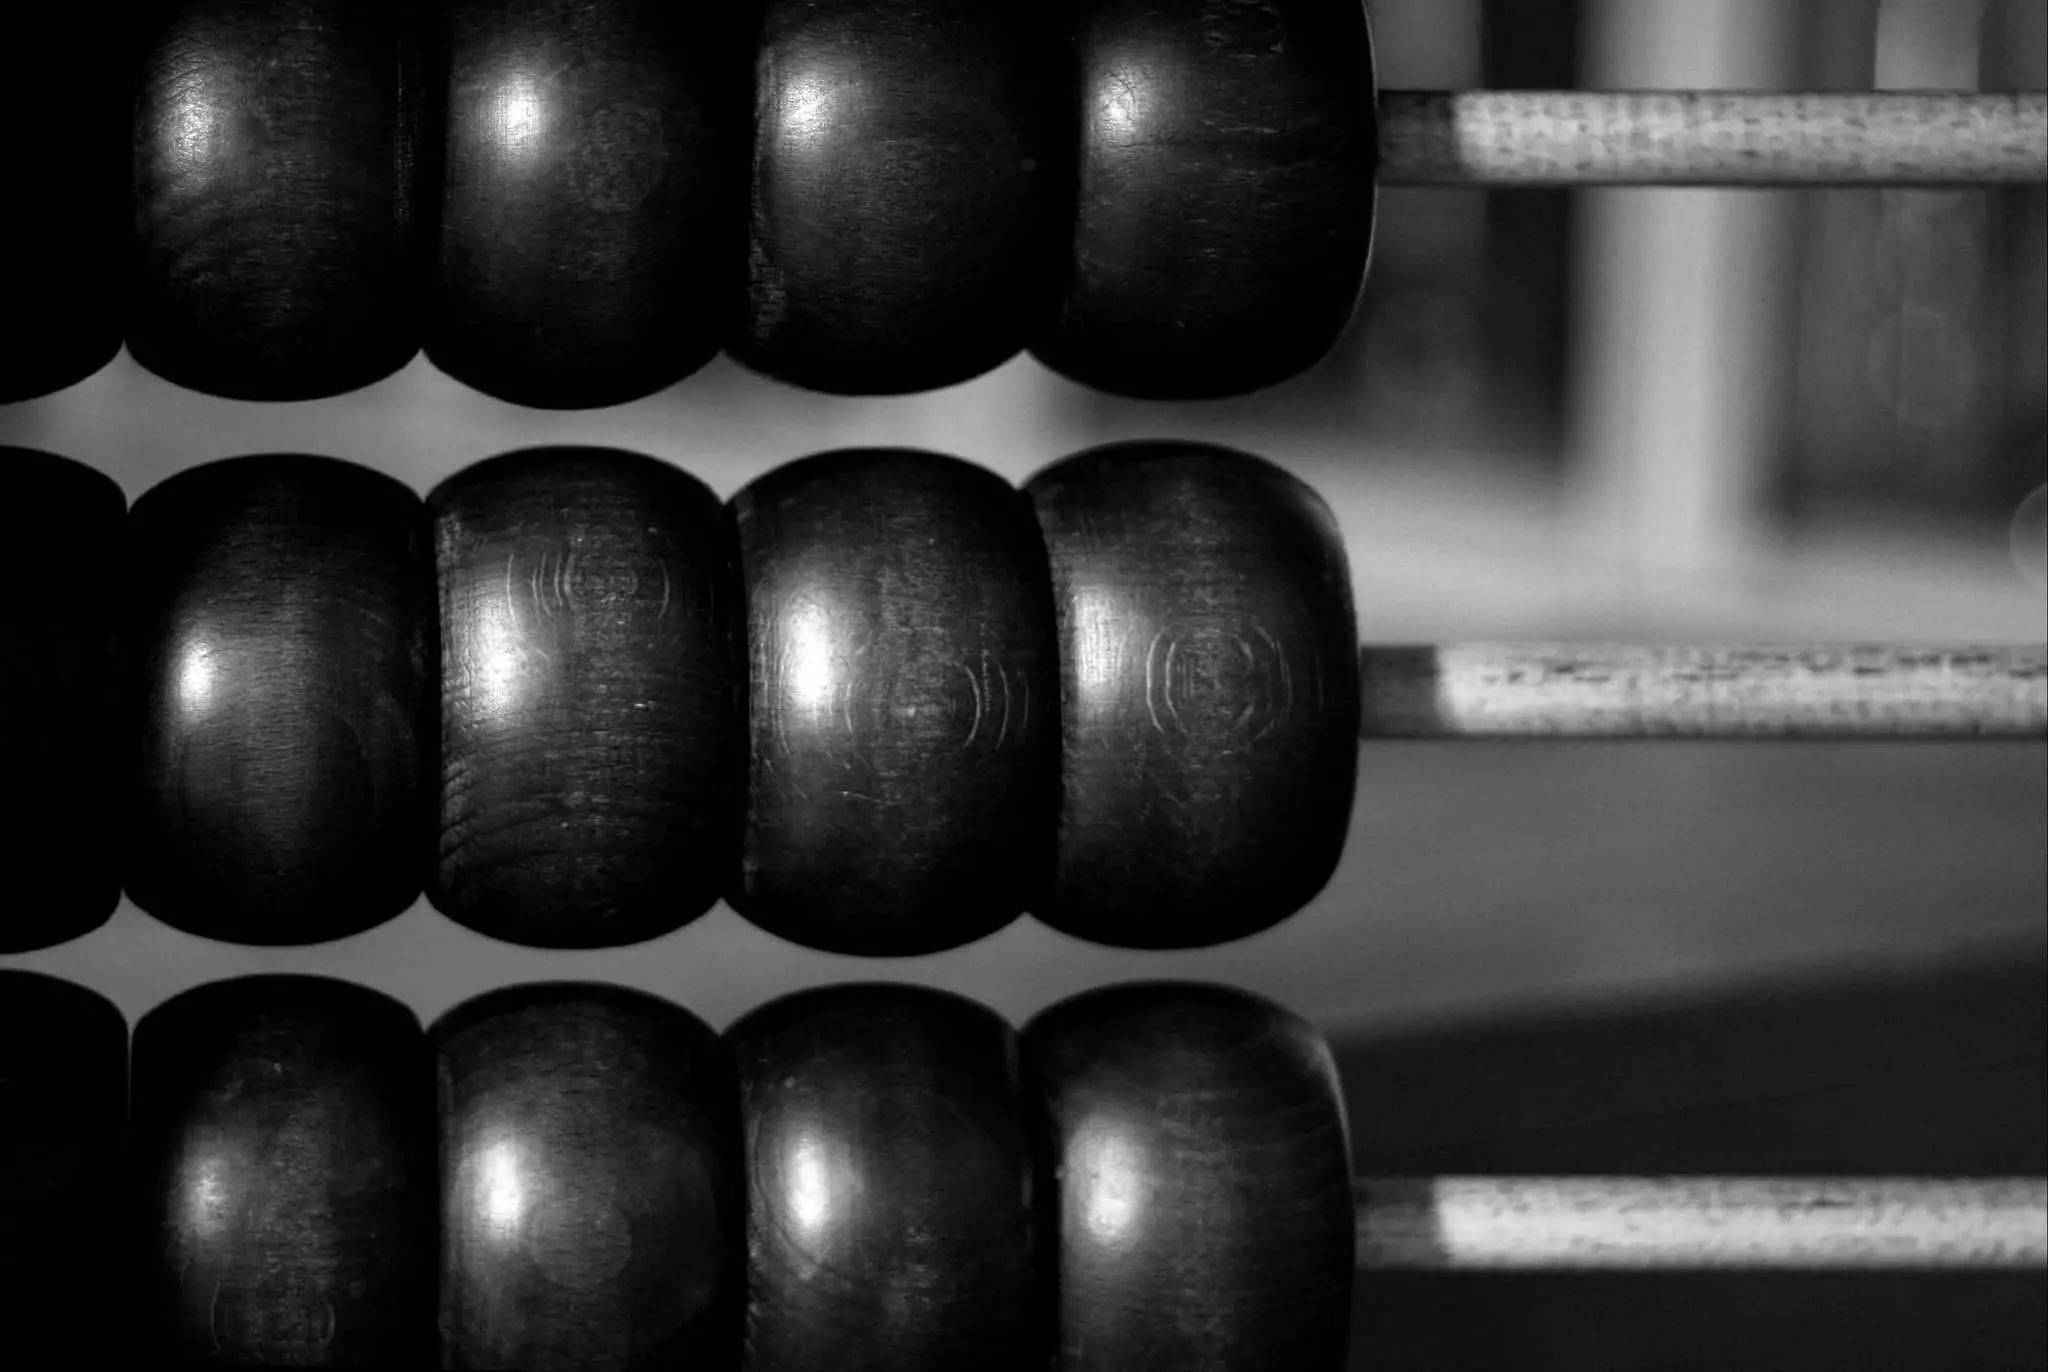 Black and white close up shot of an abacus